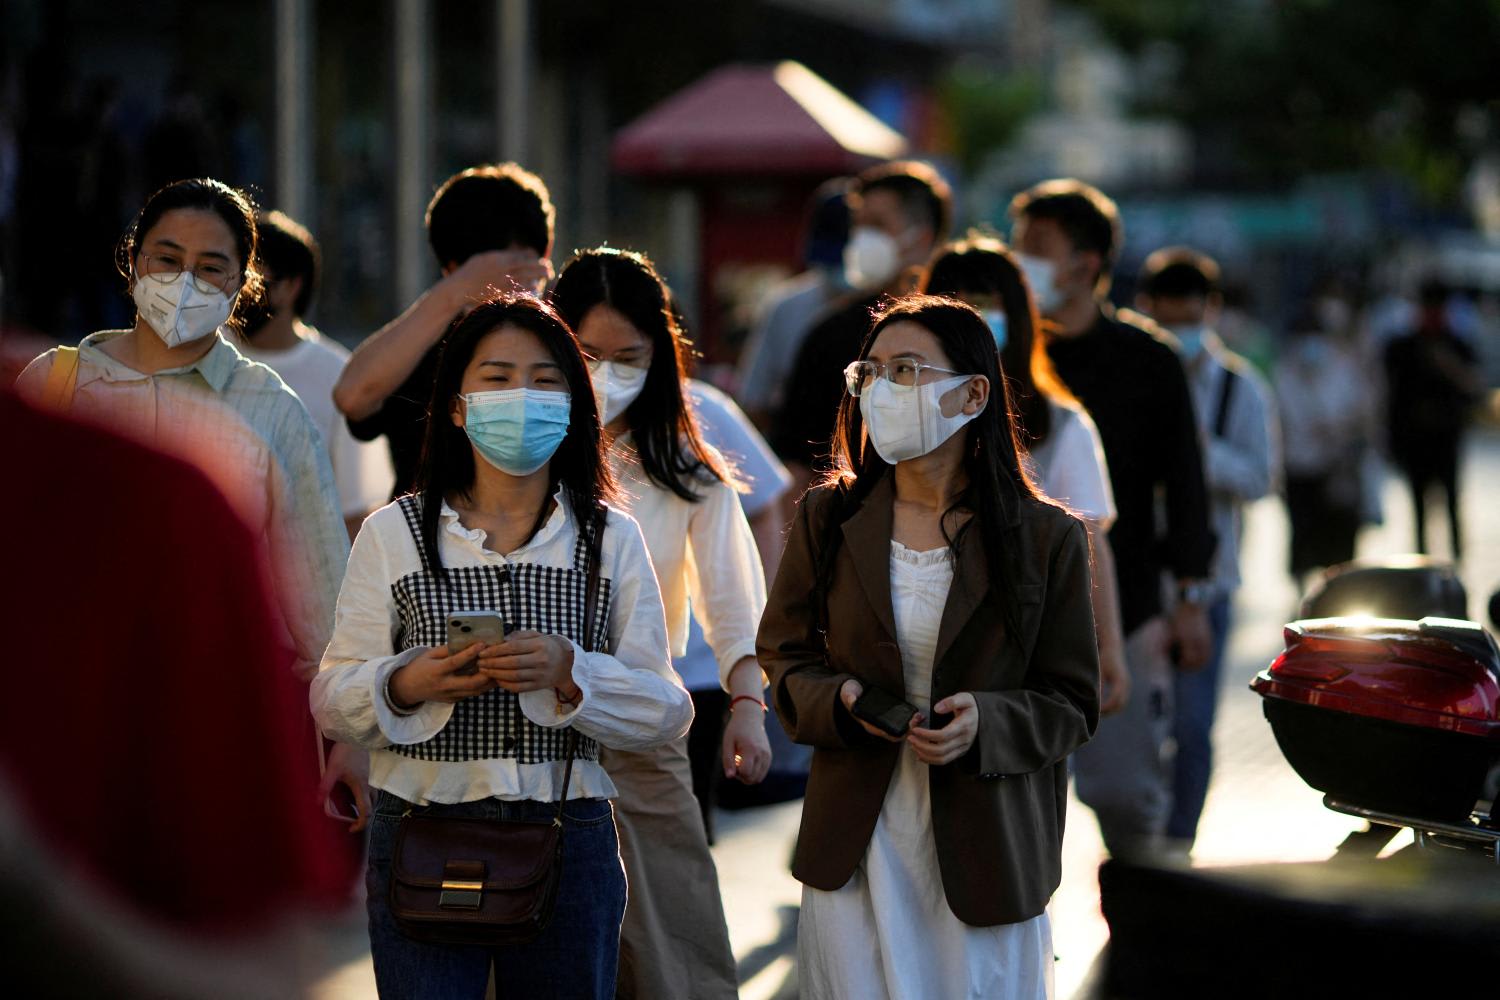 Office workers wearing protective face masks walk on a street, after the lockdown placed to curb the Covid-19 outbreak was lifted in Shanghai, China on June 7, 2022. 
